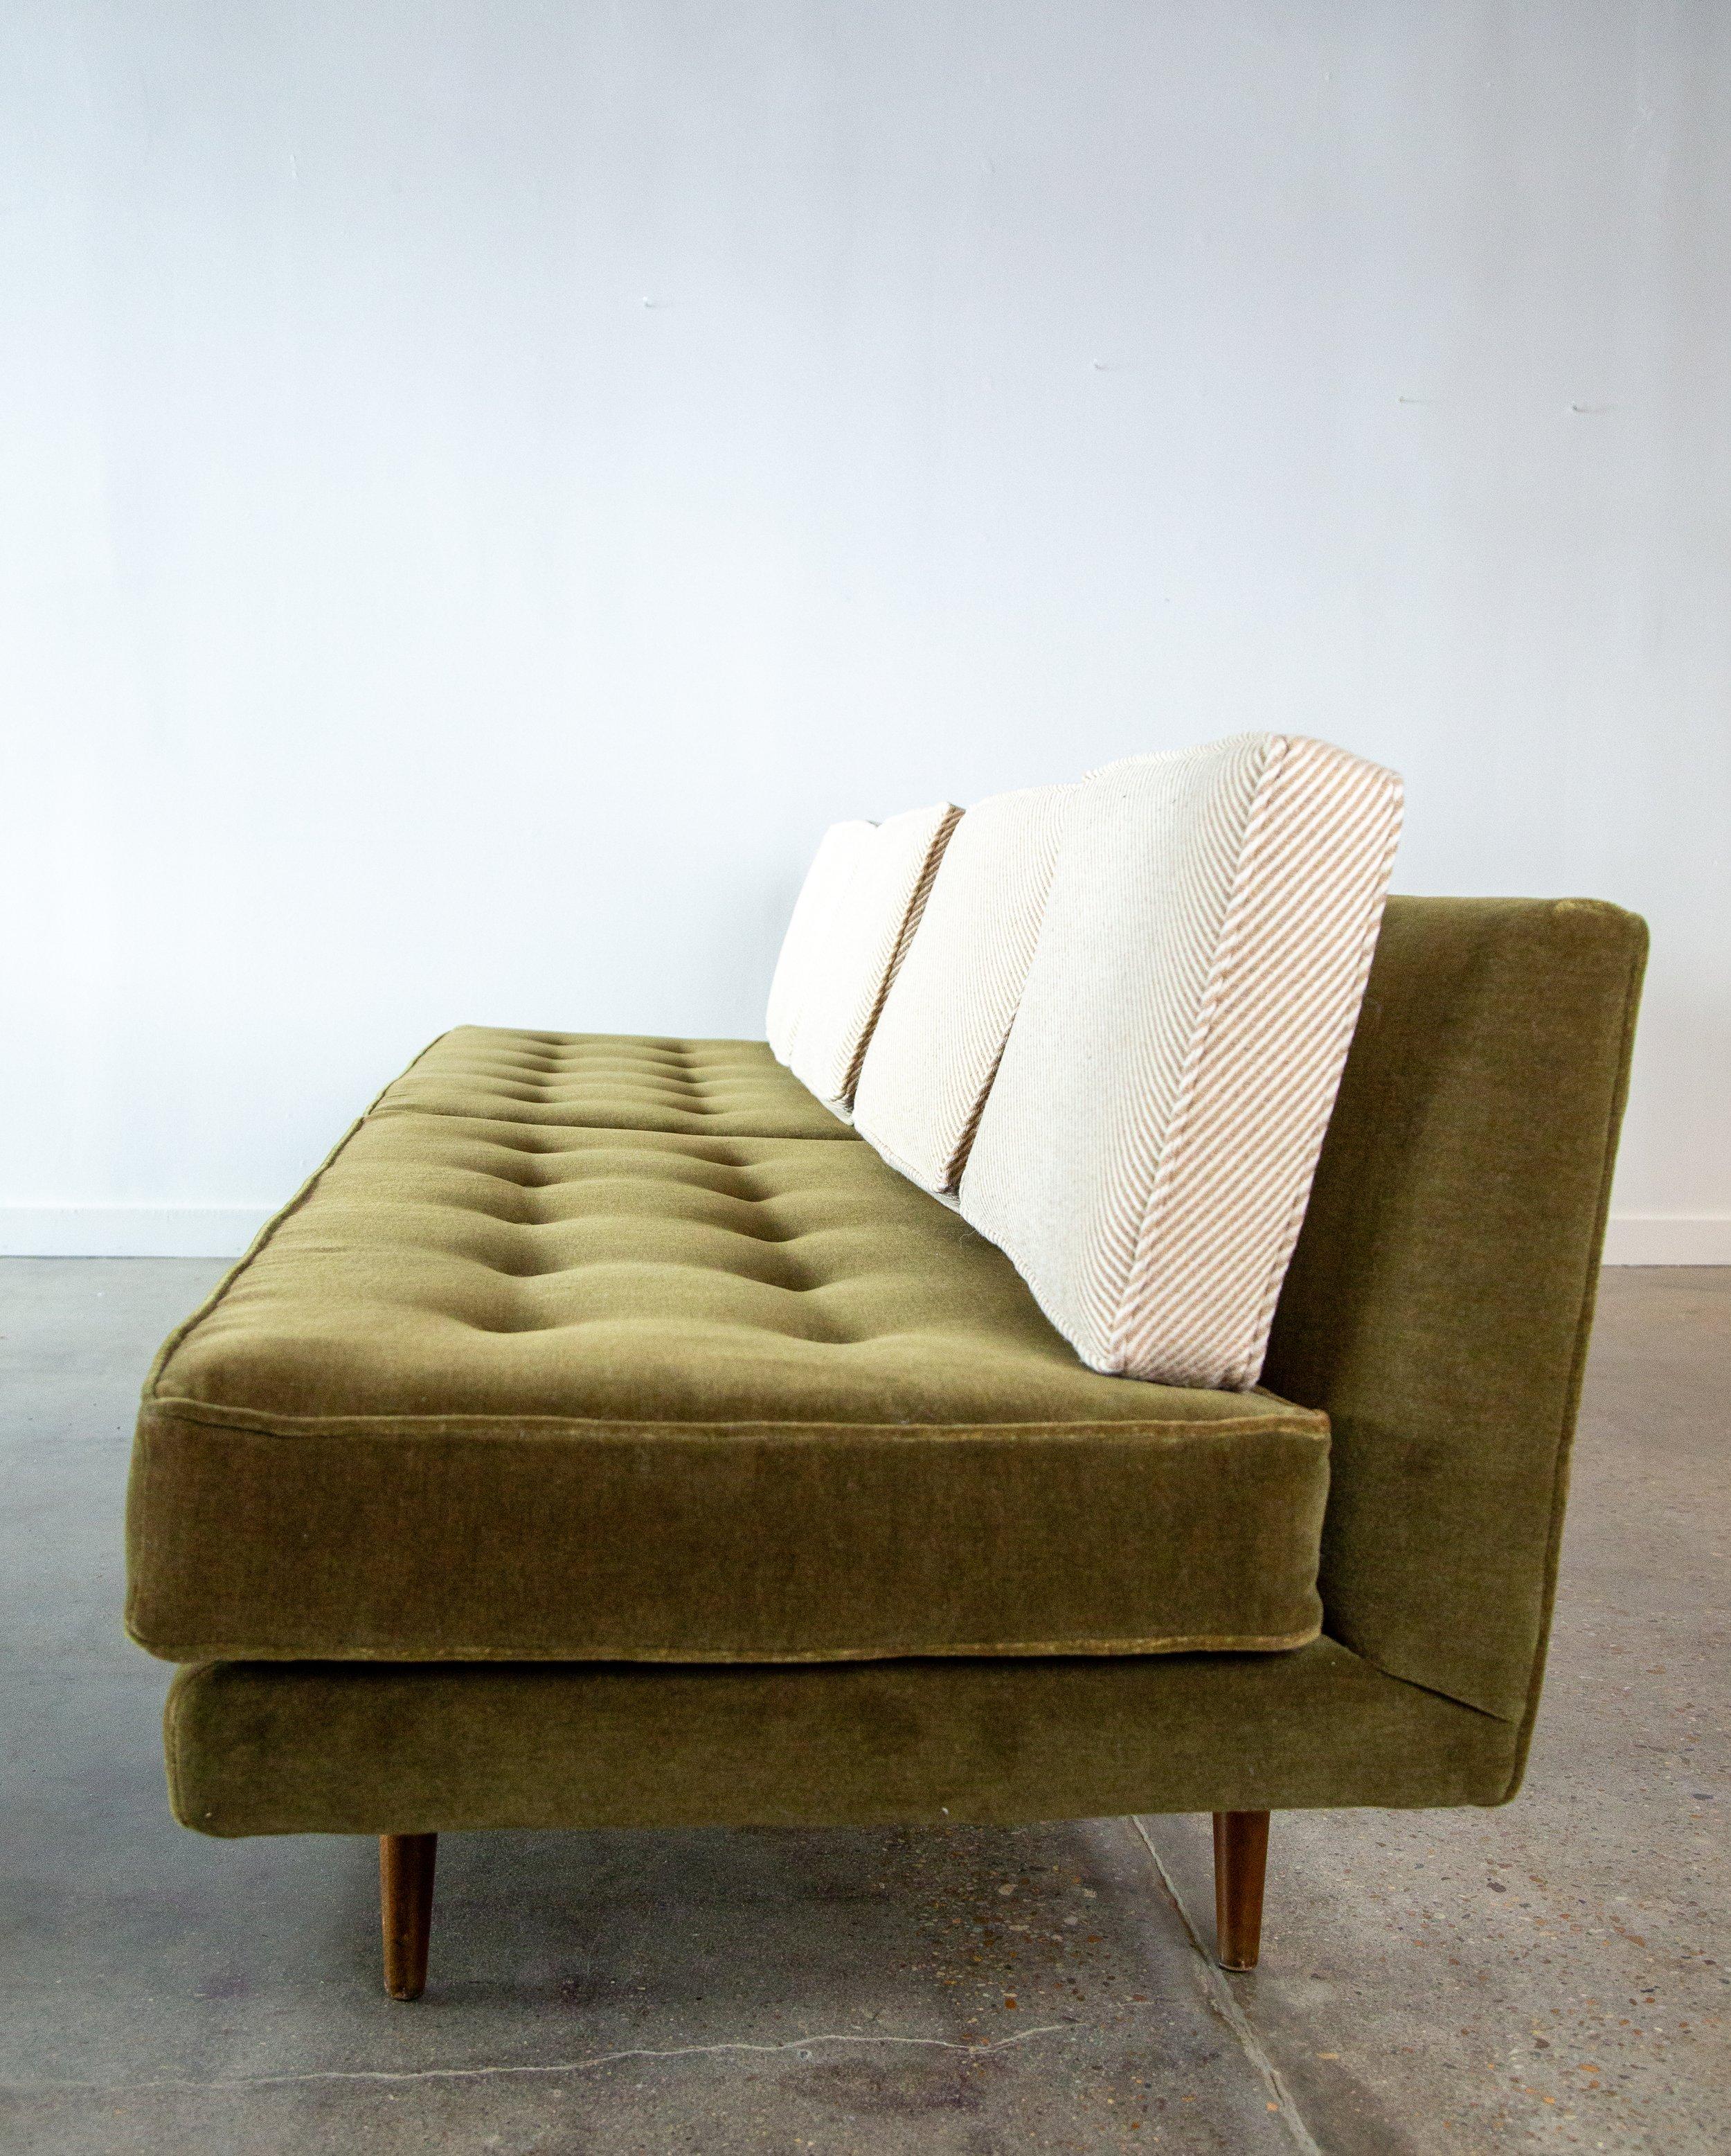 Mid-20th Century 1950s L Shaped Edward Wormley for Dunbar 5526 sectional (2 sofas) Mohair and Woo